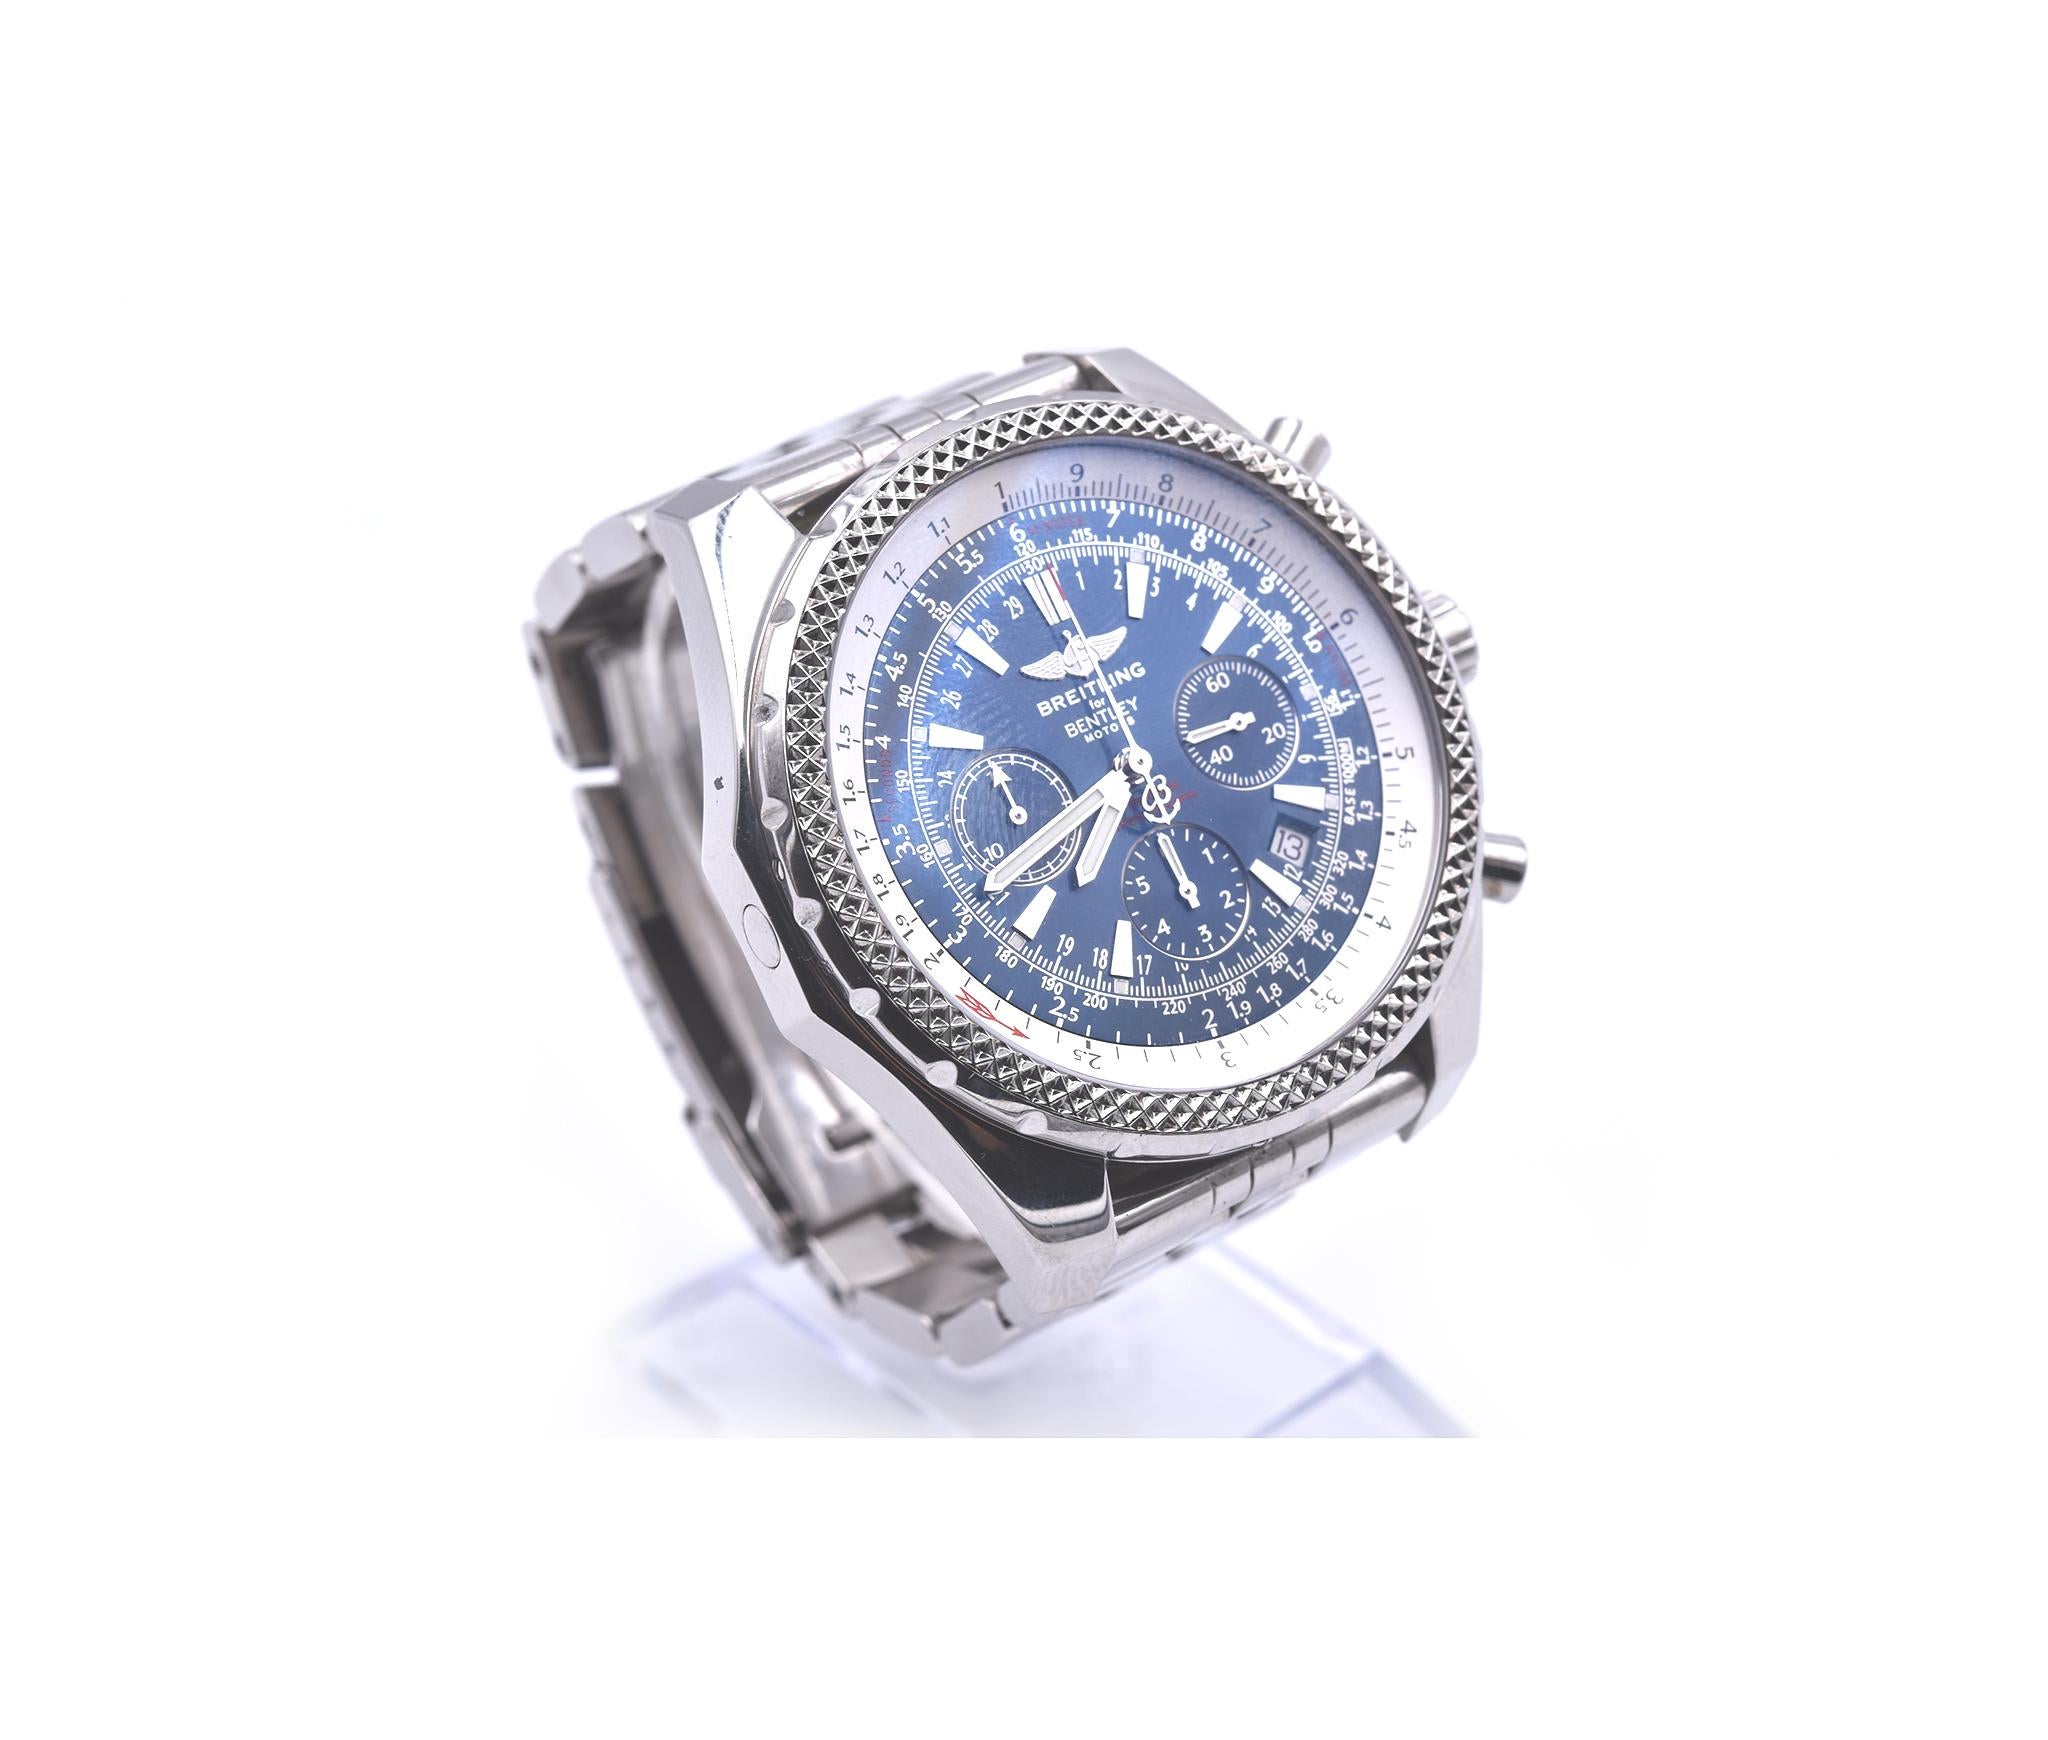 Movement: automatic
Function: hours, minutes, sub seconds, date, chronograph, GMT
Case: 48mm steel case, sapphire crystal
Band: stainless steel bracelet with deployment buckle
Dial: blue dial, silver luminous hands and hour markers 
Serial #: